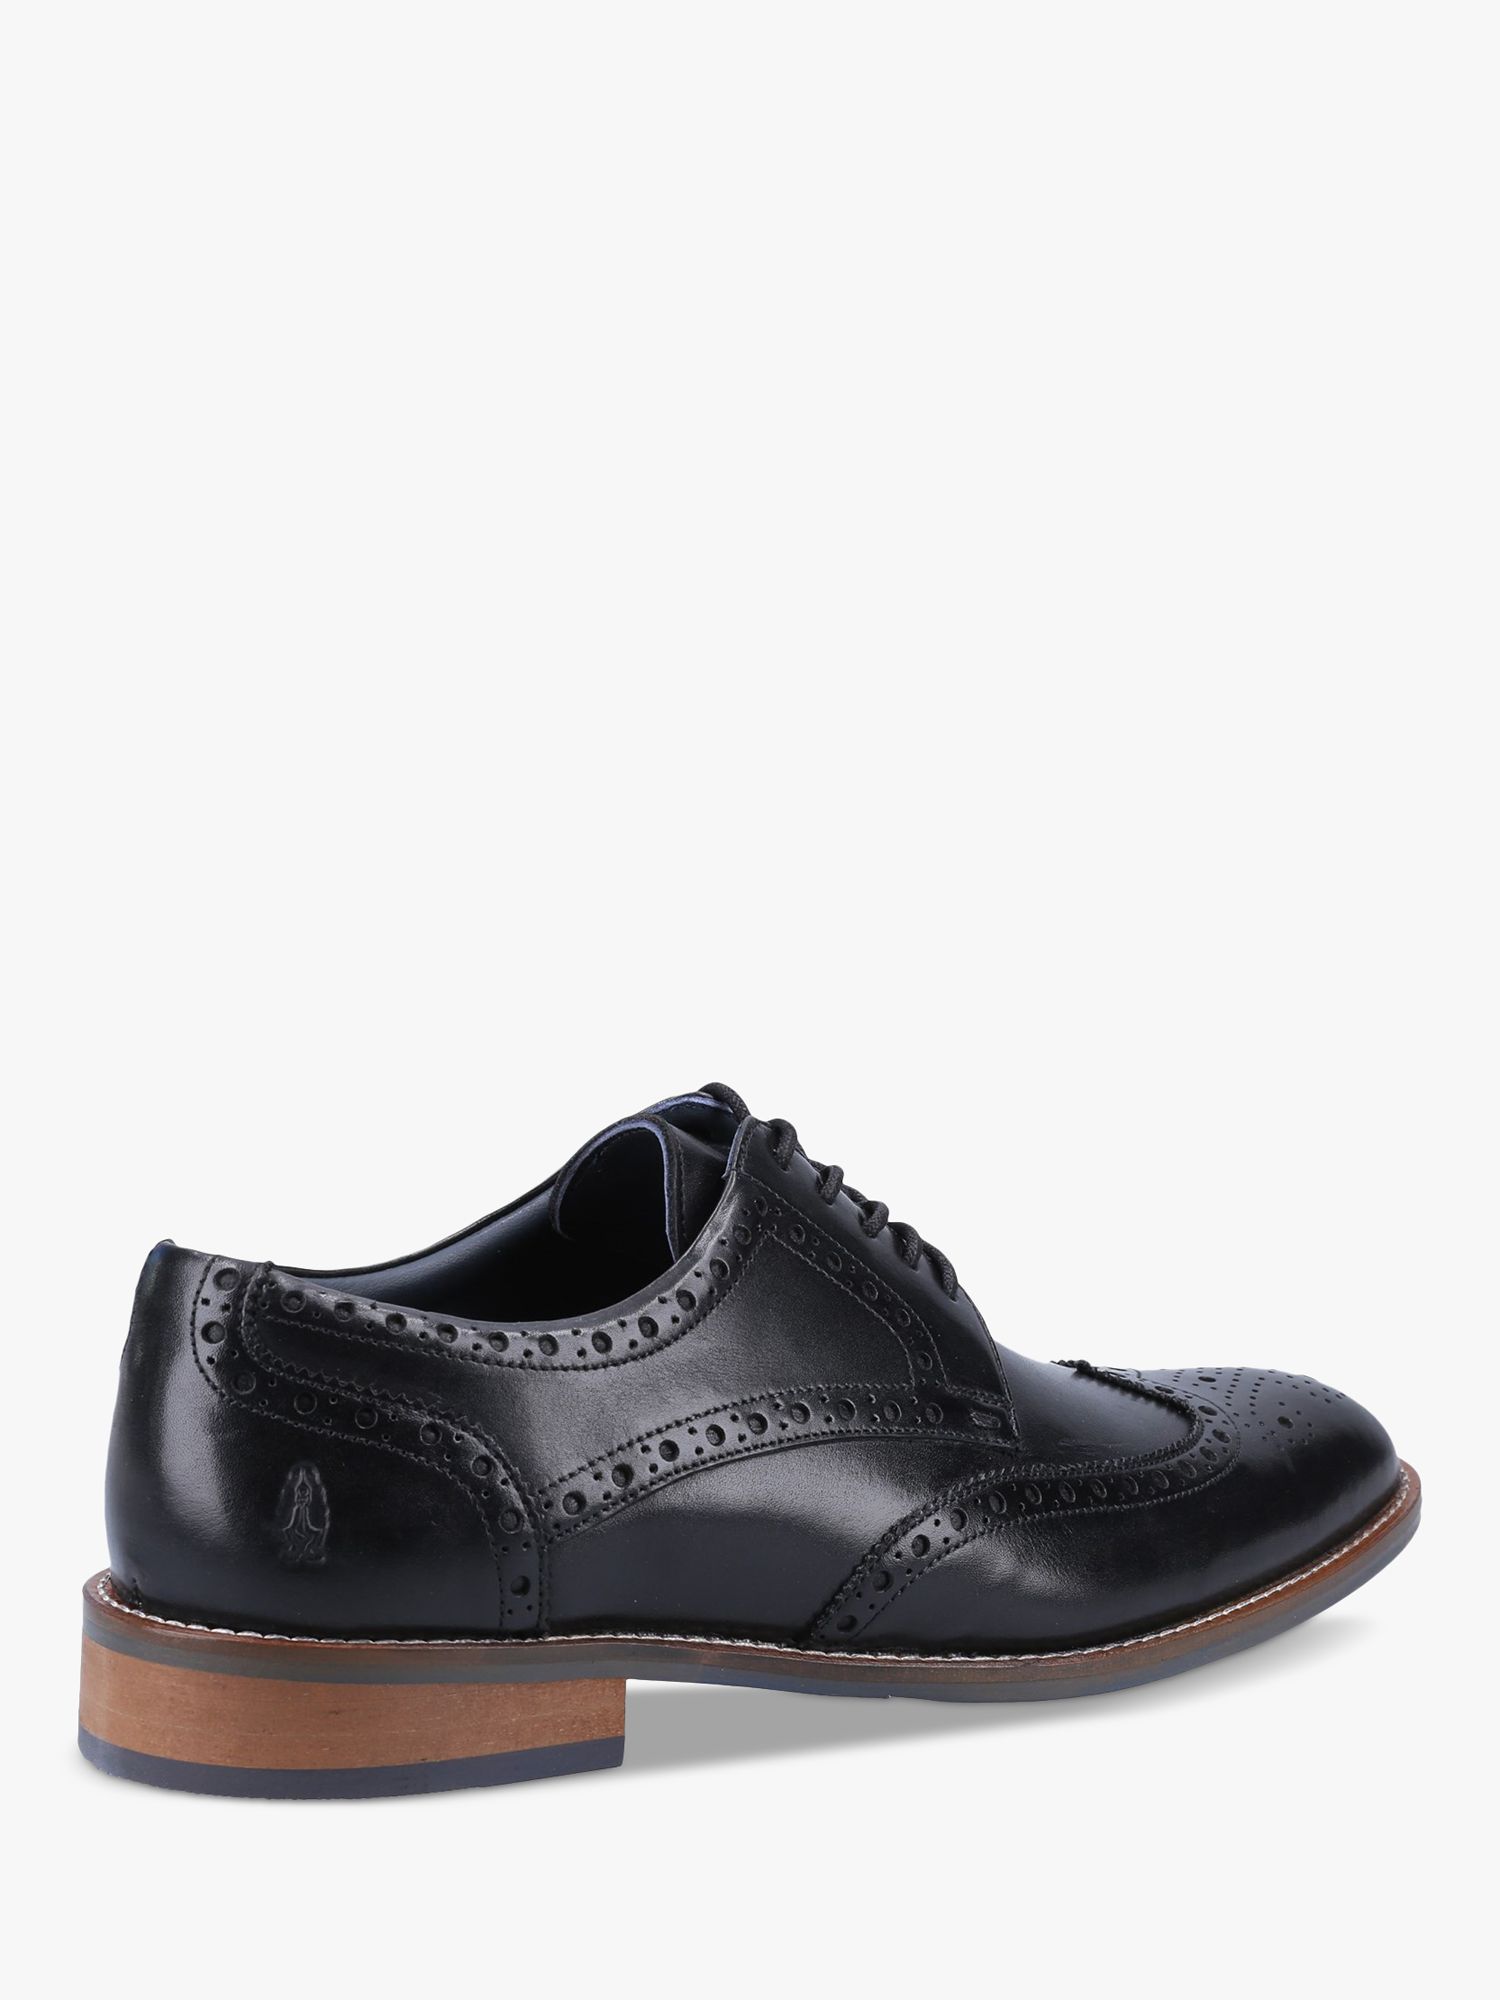 Hush Puppies Dustin Leather Brogues, Black at John Lewis & Partners